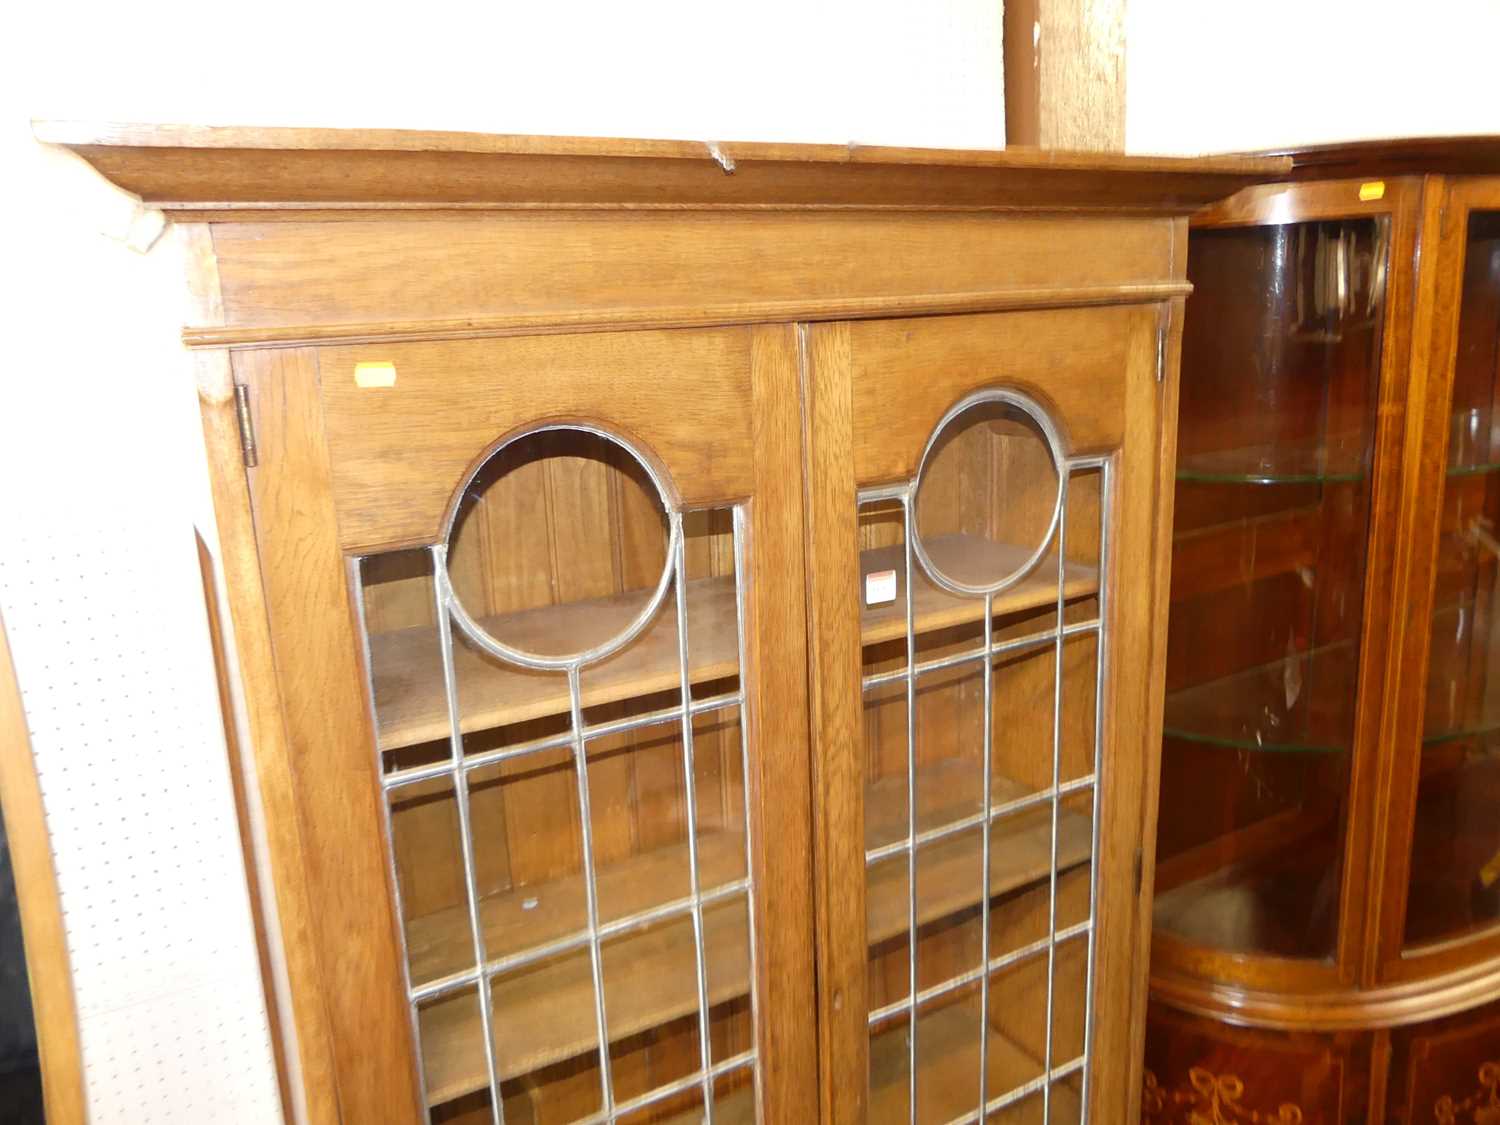 An Arts & Crafts oak double door lead glazed bookcase, with interior shelves over floral stylised - Image 2 of 4